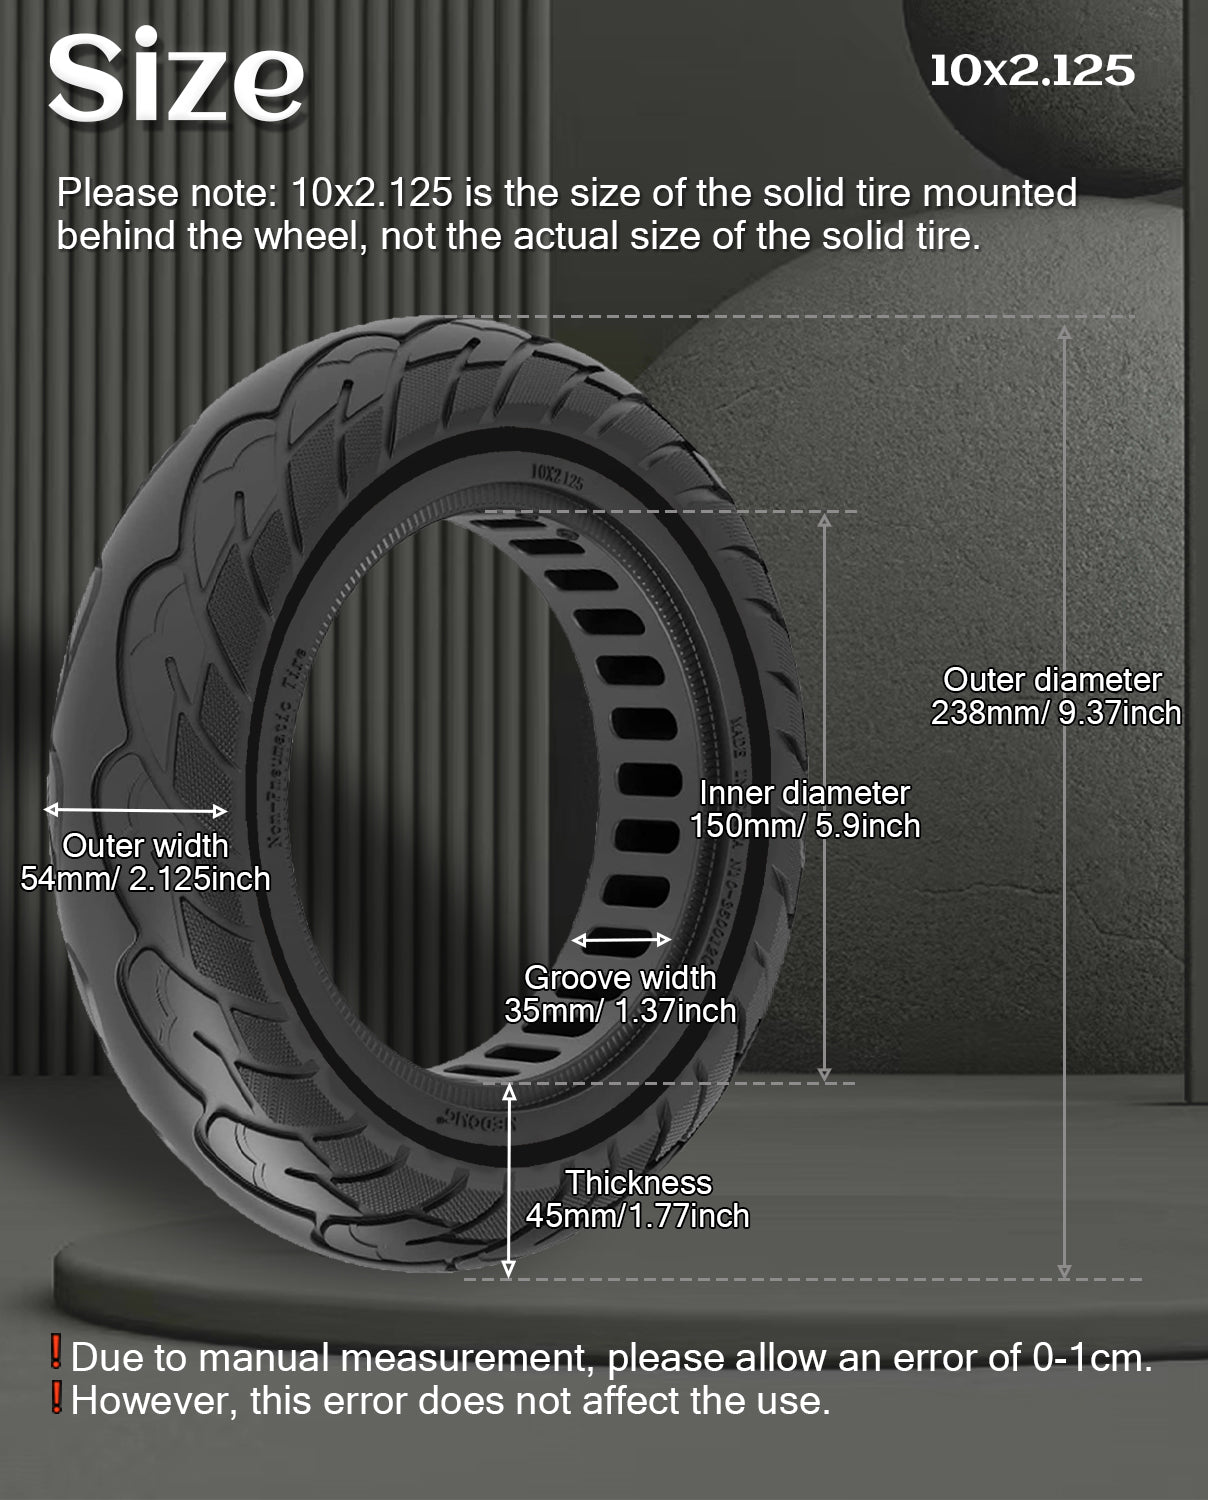 GLDYTIMES 10 inch Solid Rubber Tire, 10x2.125, 50/75-6.1 Tubeless Tyre for Xiaomi M365/Pro 1s/Pro 2, Gotrax G4/Xr/V2 Electric Scooter, 10x2 Puncture-Proof Explosion-Proof Wheel Replacement（Black 1pc）